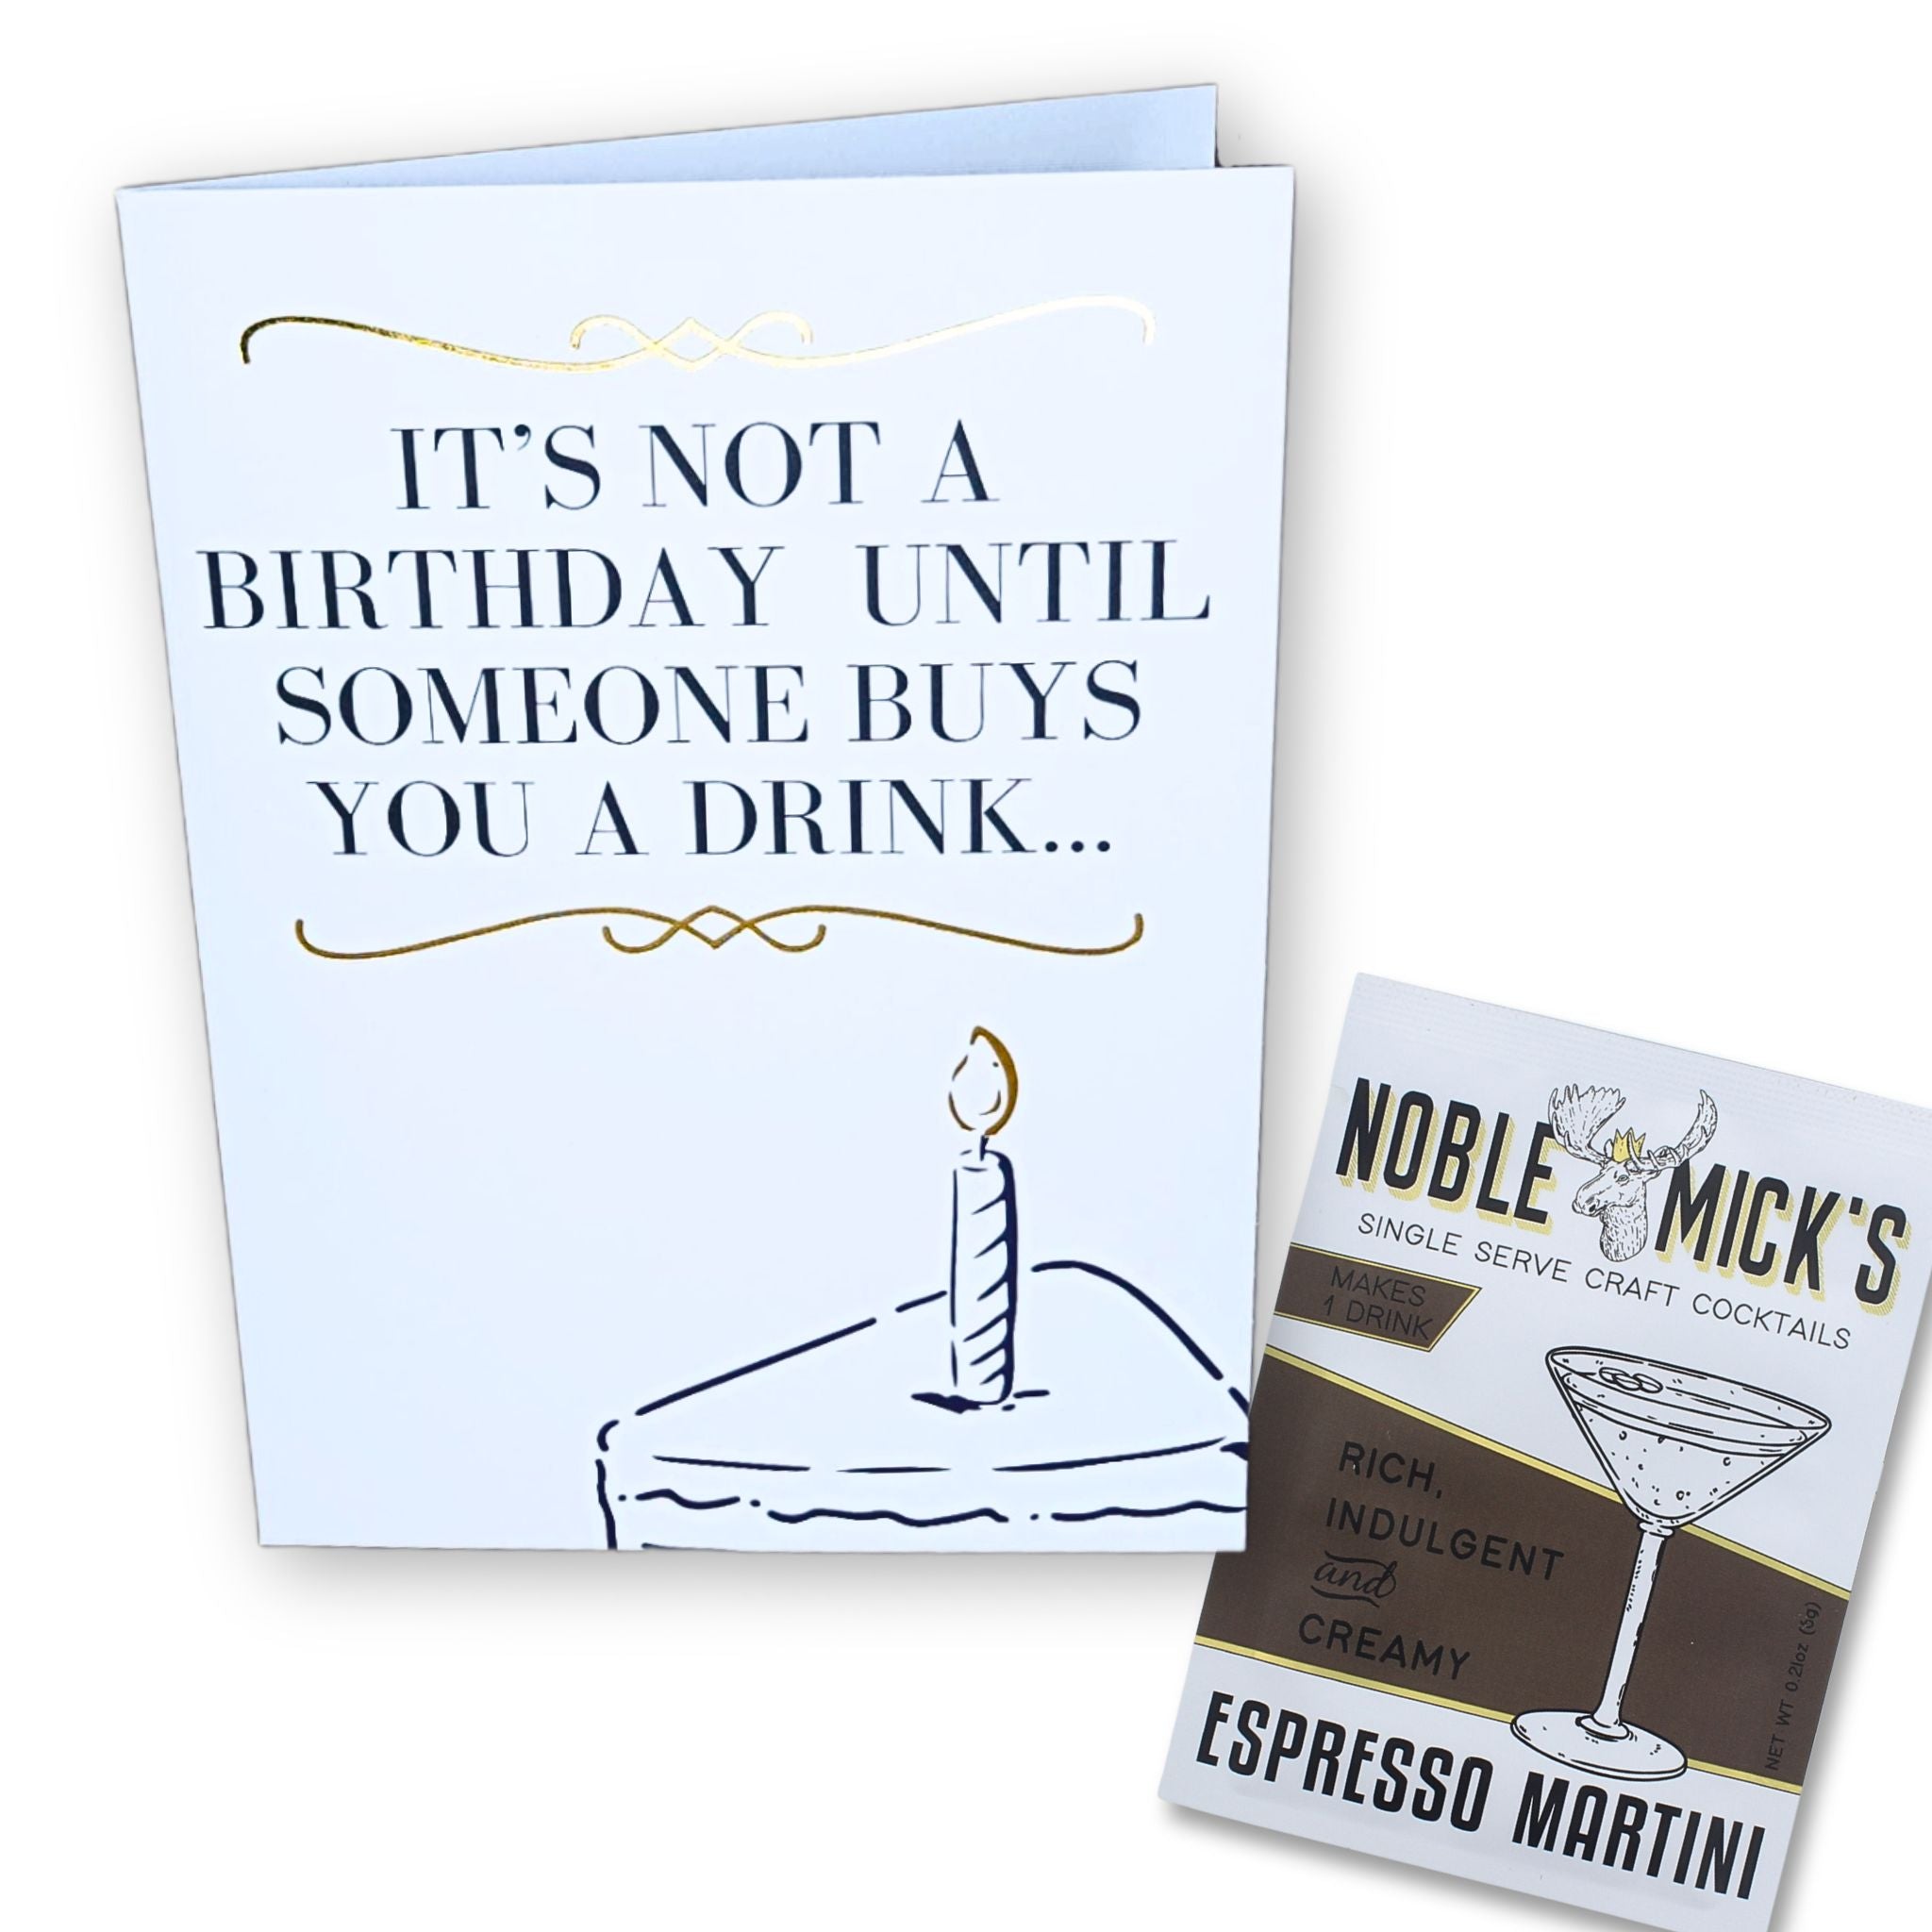 Noble Mick's Not a Birthday Until Someone Buys Your a Drink Greeting Card & Espresso Martini